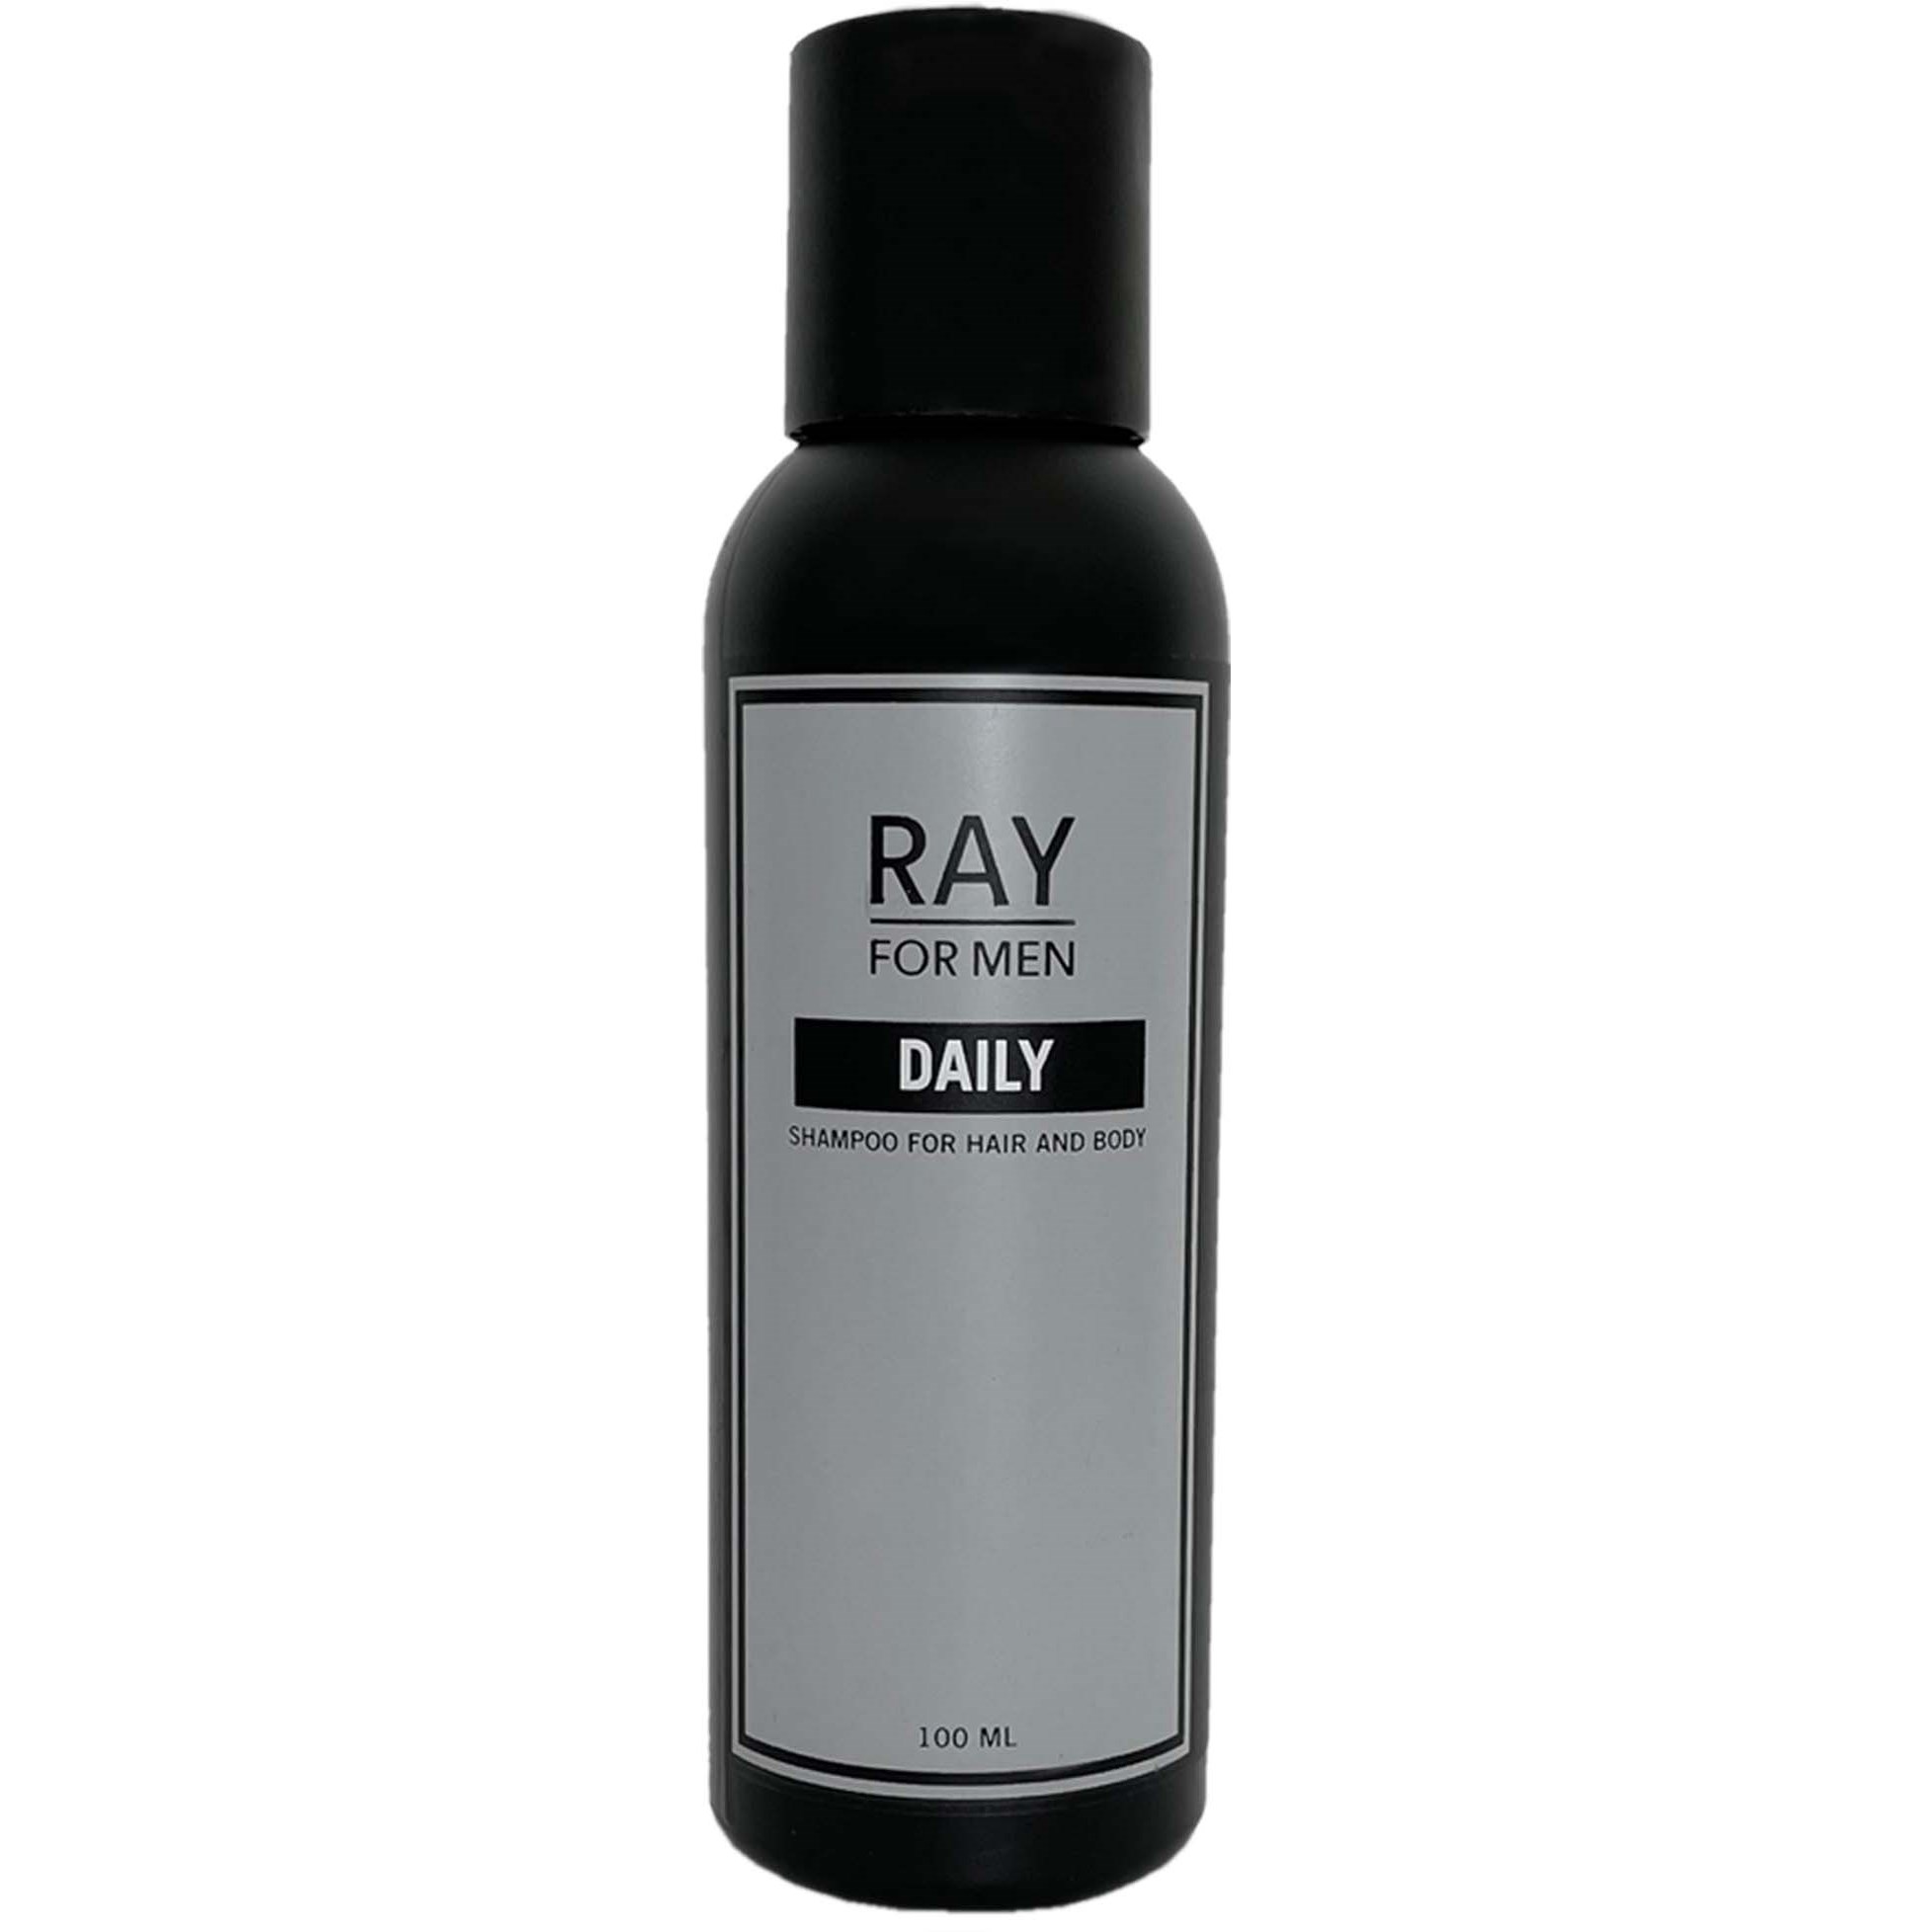 RAY FOR MEN Daily 100 ml